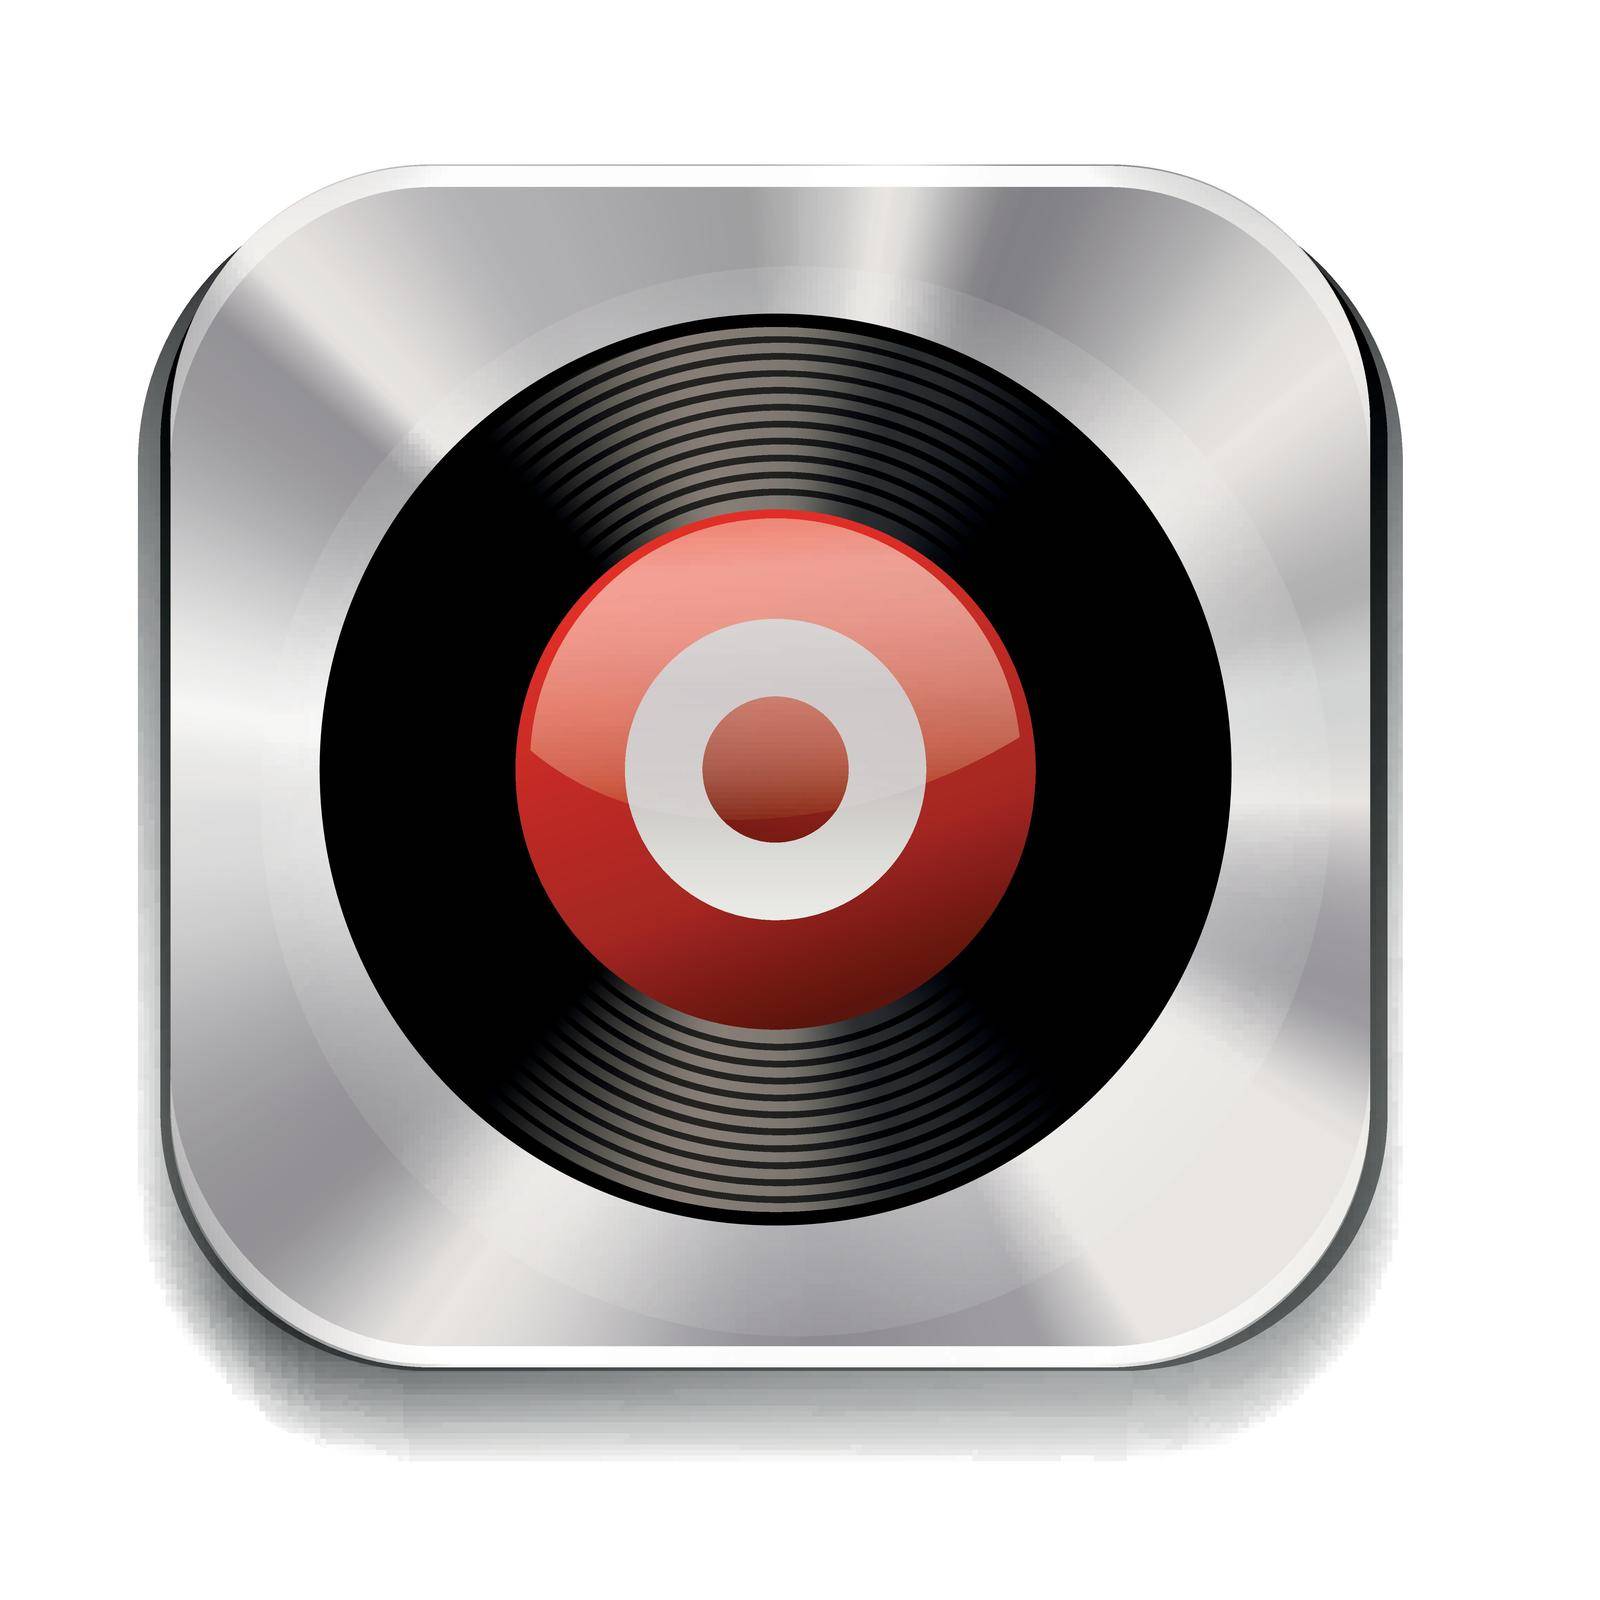 Retro icon by iimages